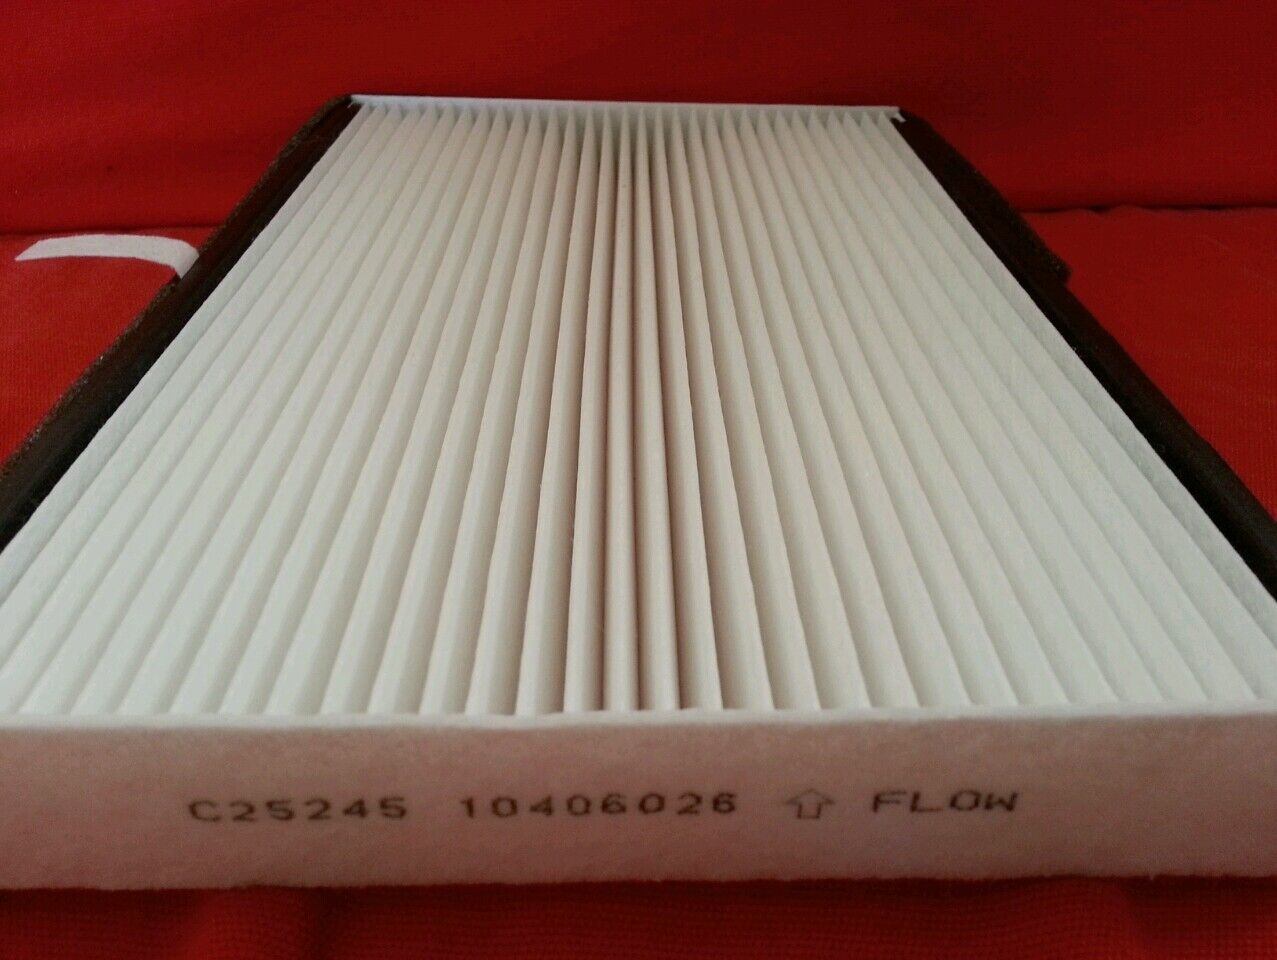  C25245 CABIN AIR FILTER For Impala Monte Carlo Century LaCrosse US Seller